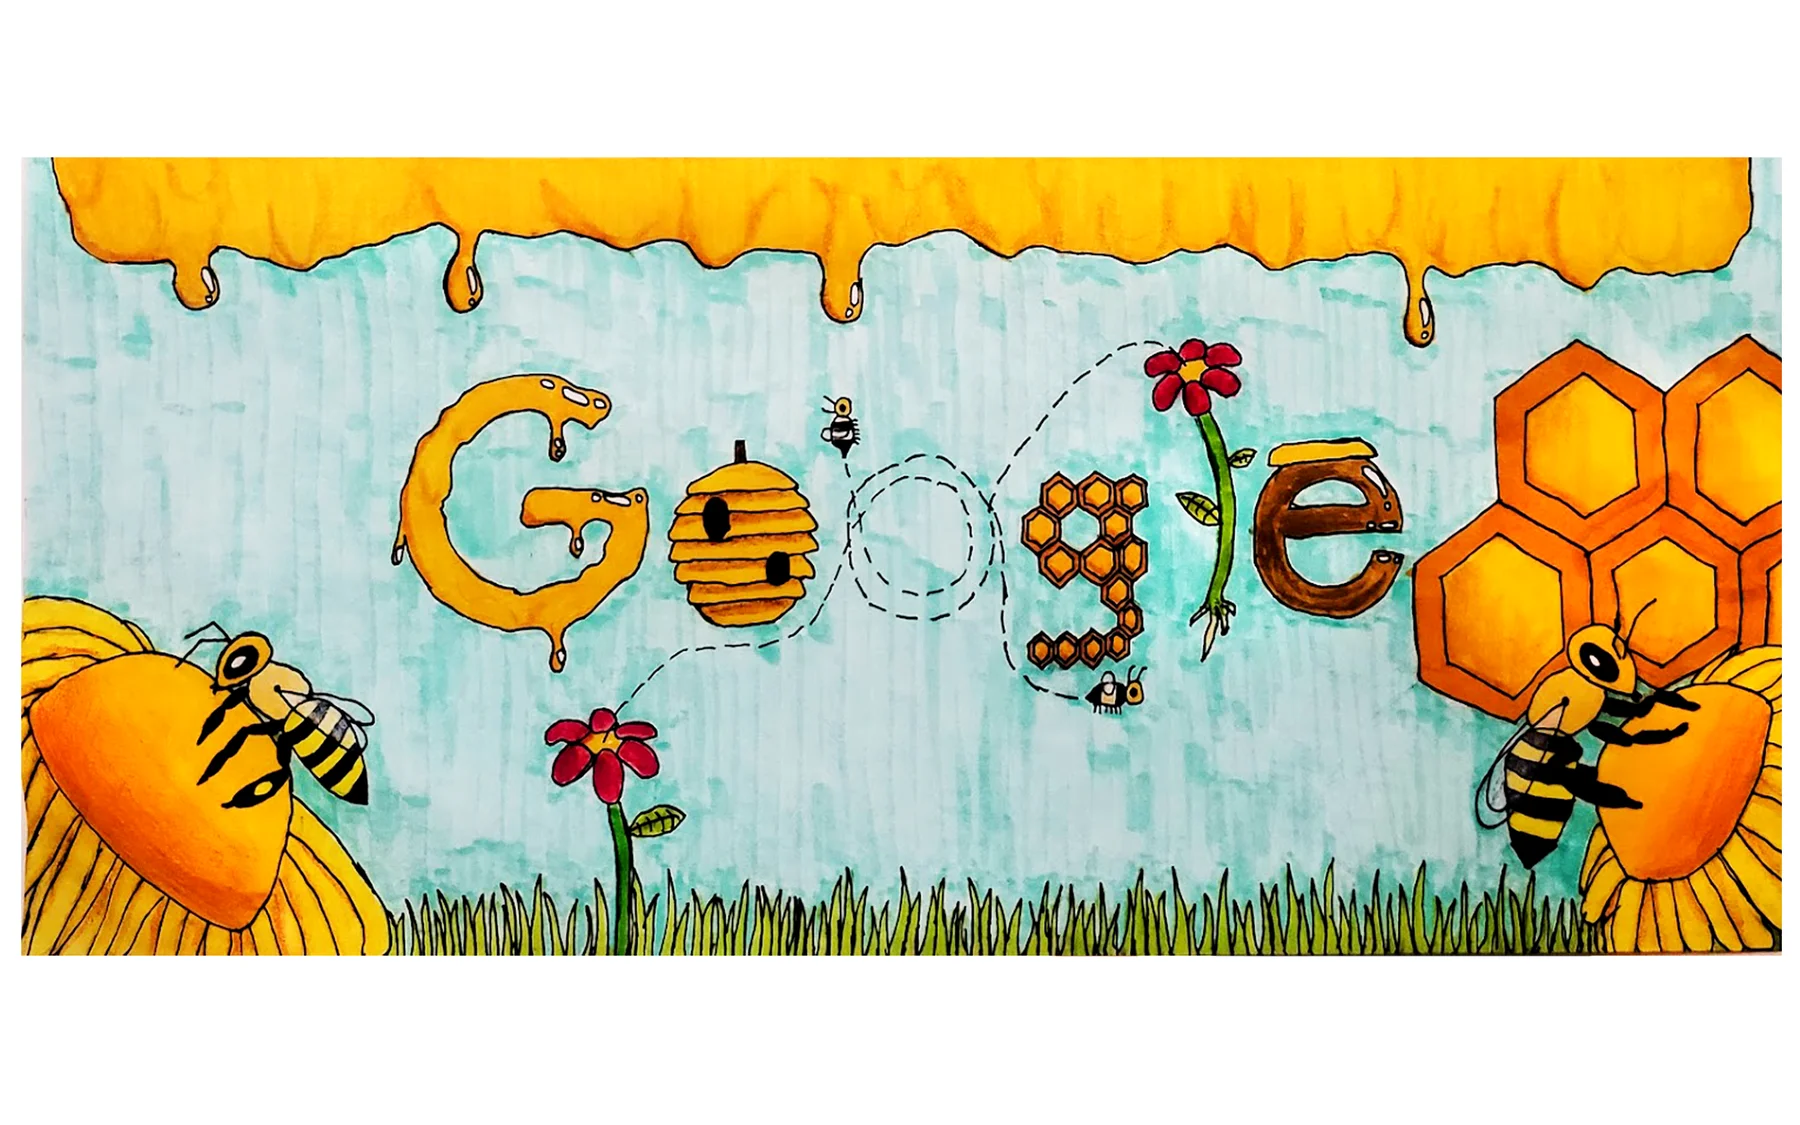 Illustration of the GOOGLE logo surrounded by bumble bee elements. The G is formed by honey, the first O is a beehive, the second O is the circular motion of a bee flying, the G is honeycomb, the L is a flower, and the E is more honey. The background scene is a field with large bees and flowers flanking each side and honey dripping from the top of the frame with a large honeycomb off to the right.